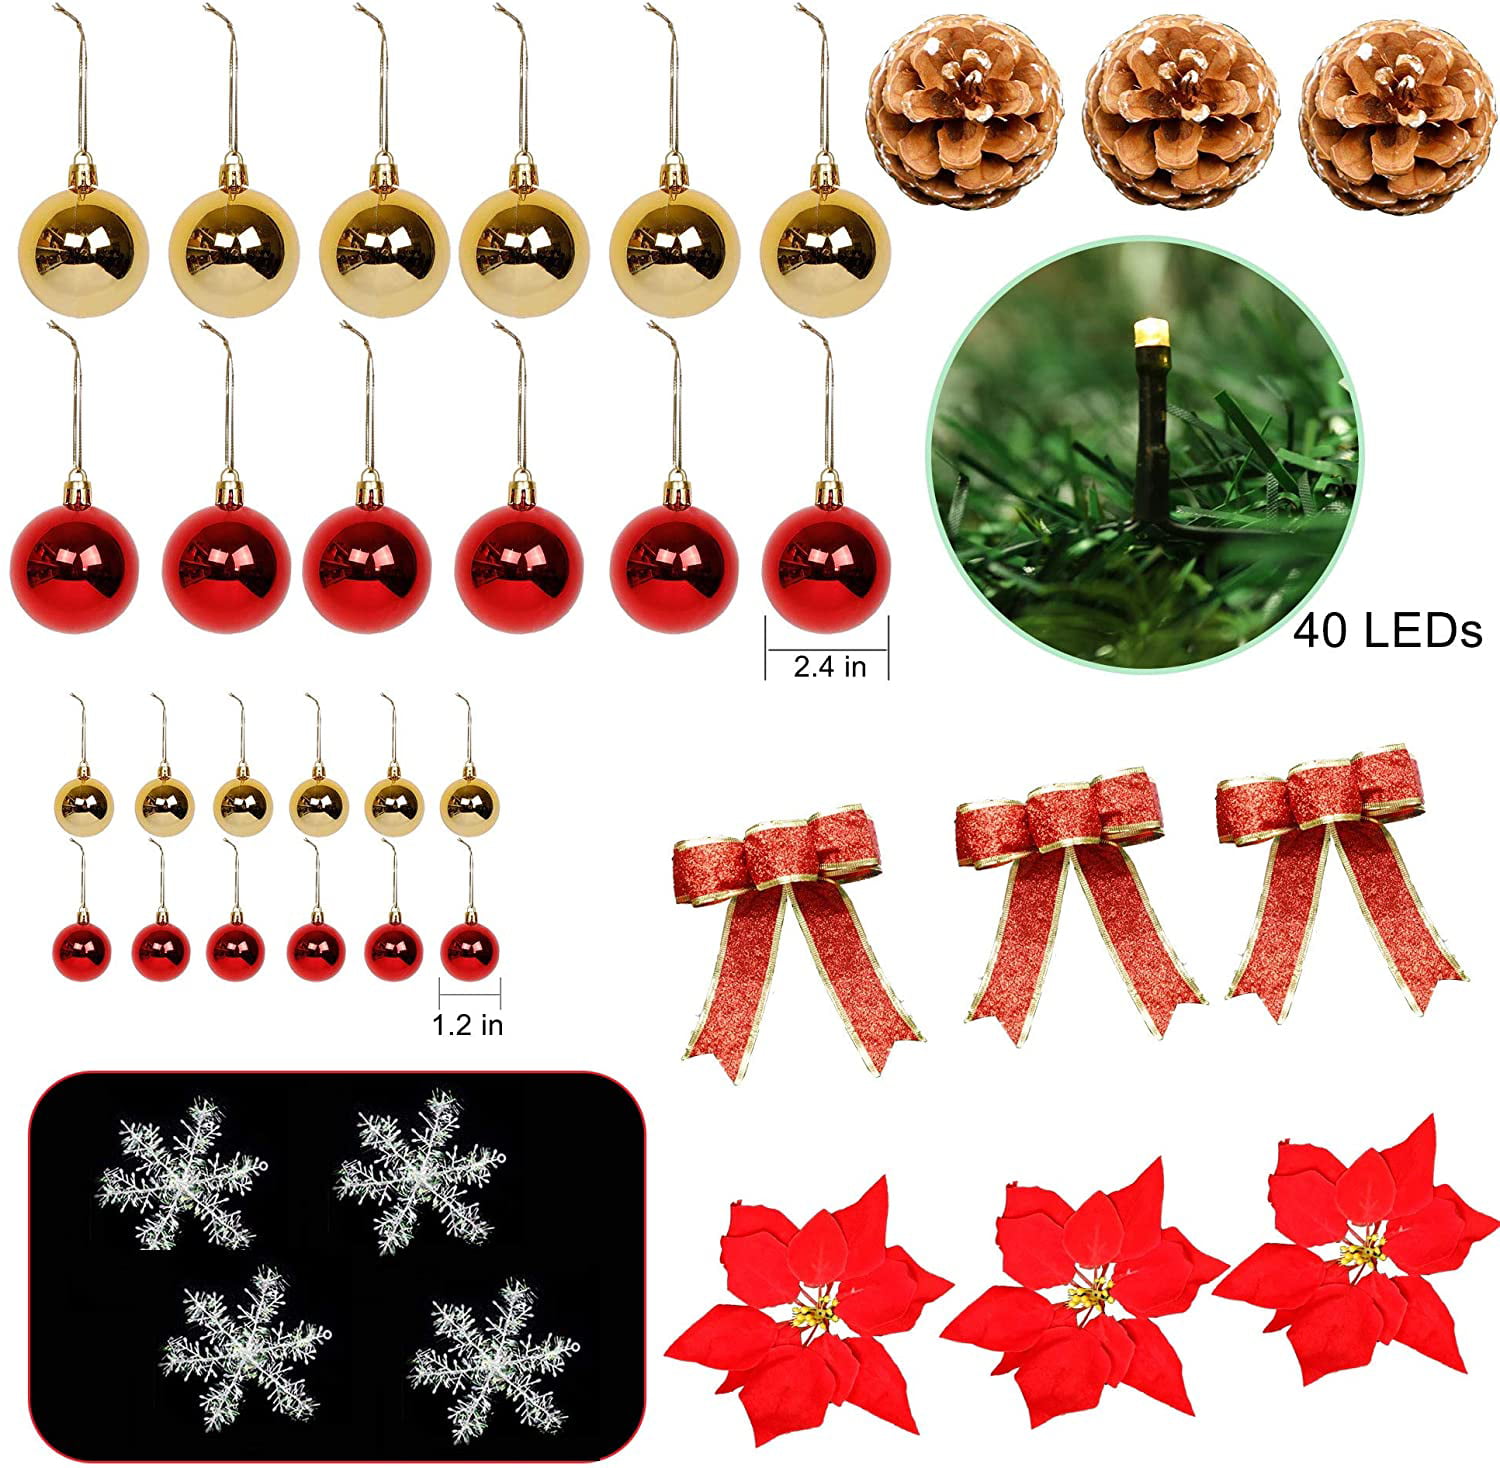 Pre Lit Garland Wreath with Pine Cones for Indoor Home Winter Holiday New Year Xmas Decorations Battery Operated Christmas Garland with Lights ATDAWN 9 Foot Christmas Lighted Garland 